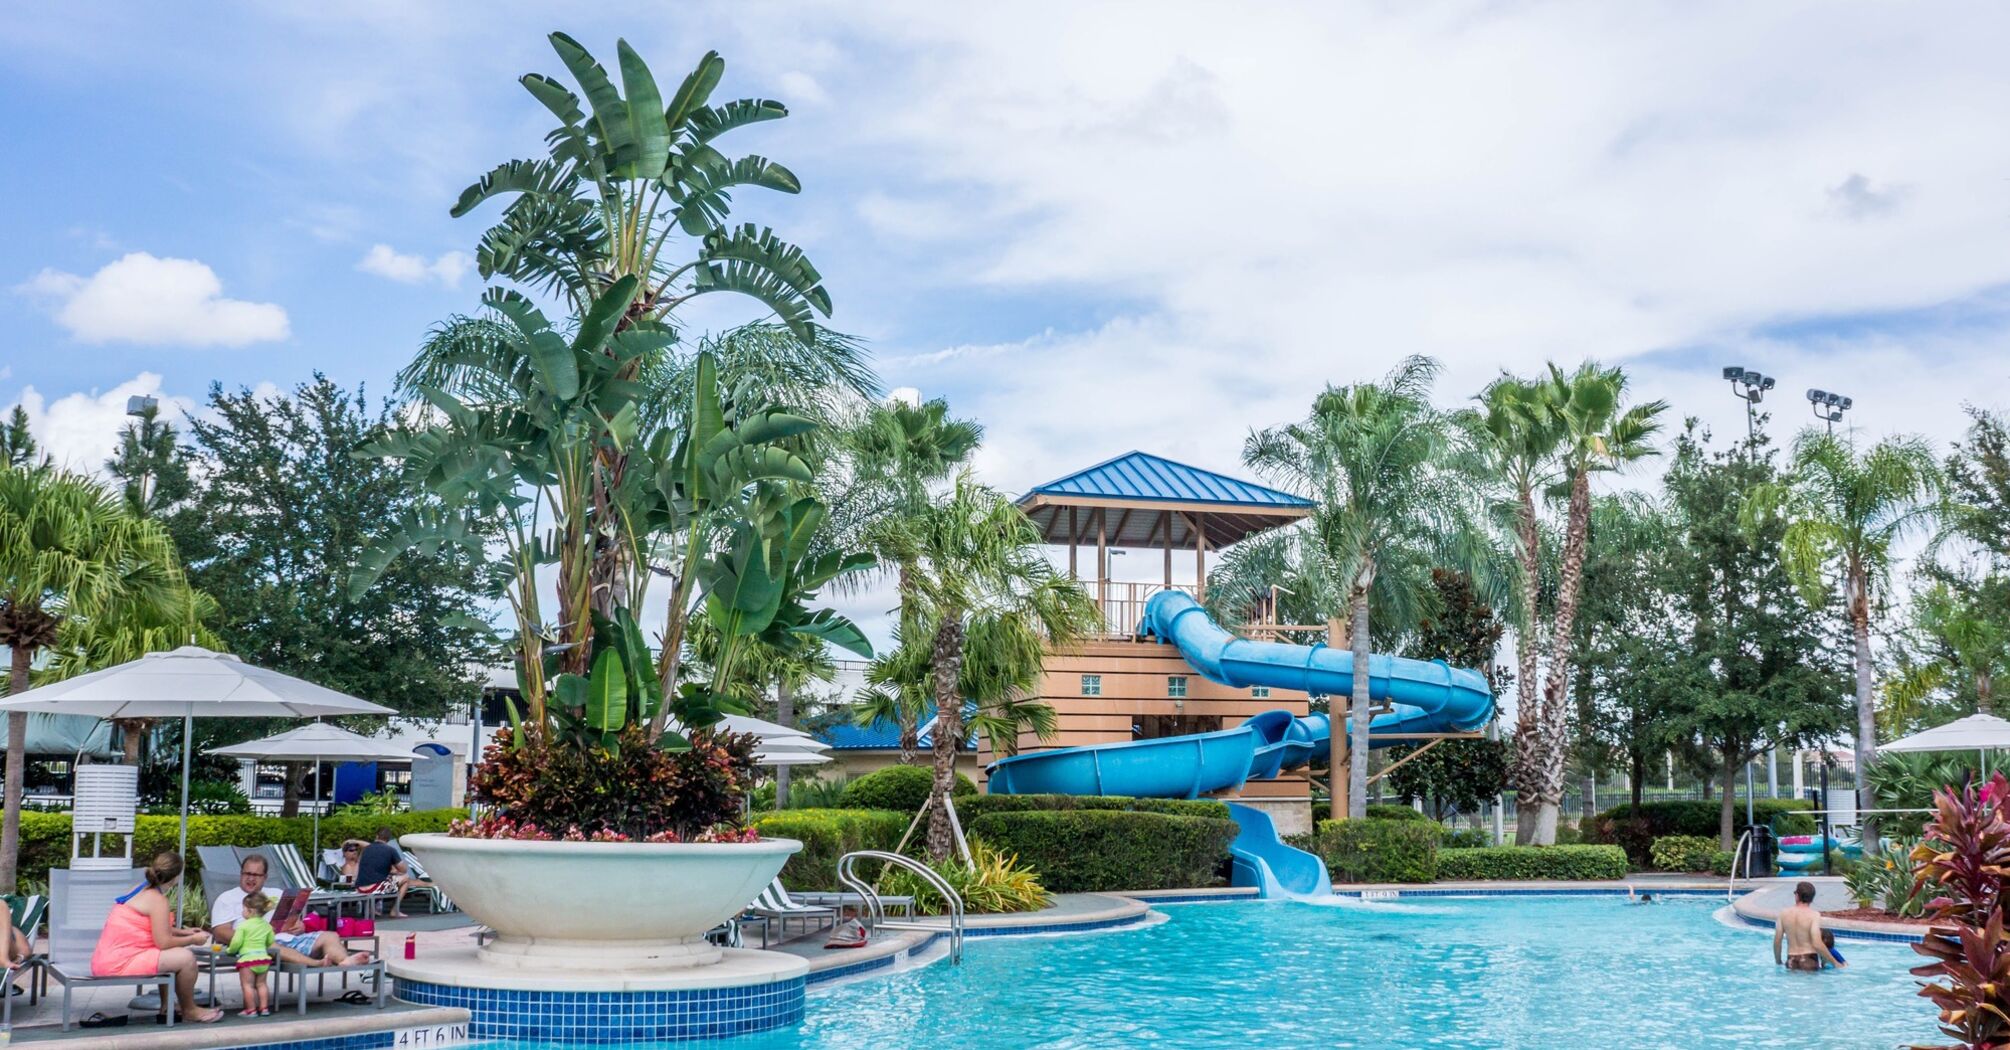 America's best water parks with accommodations